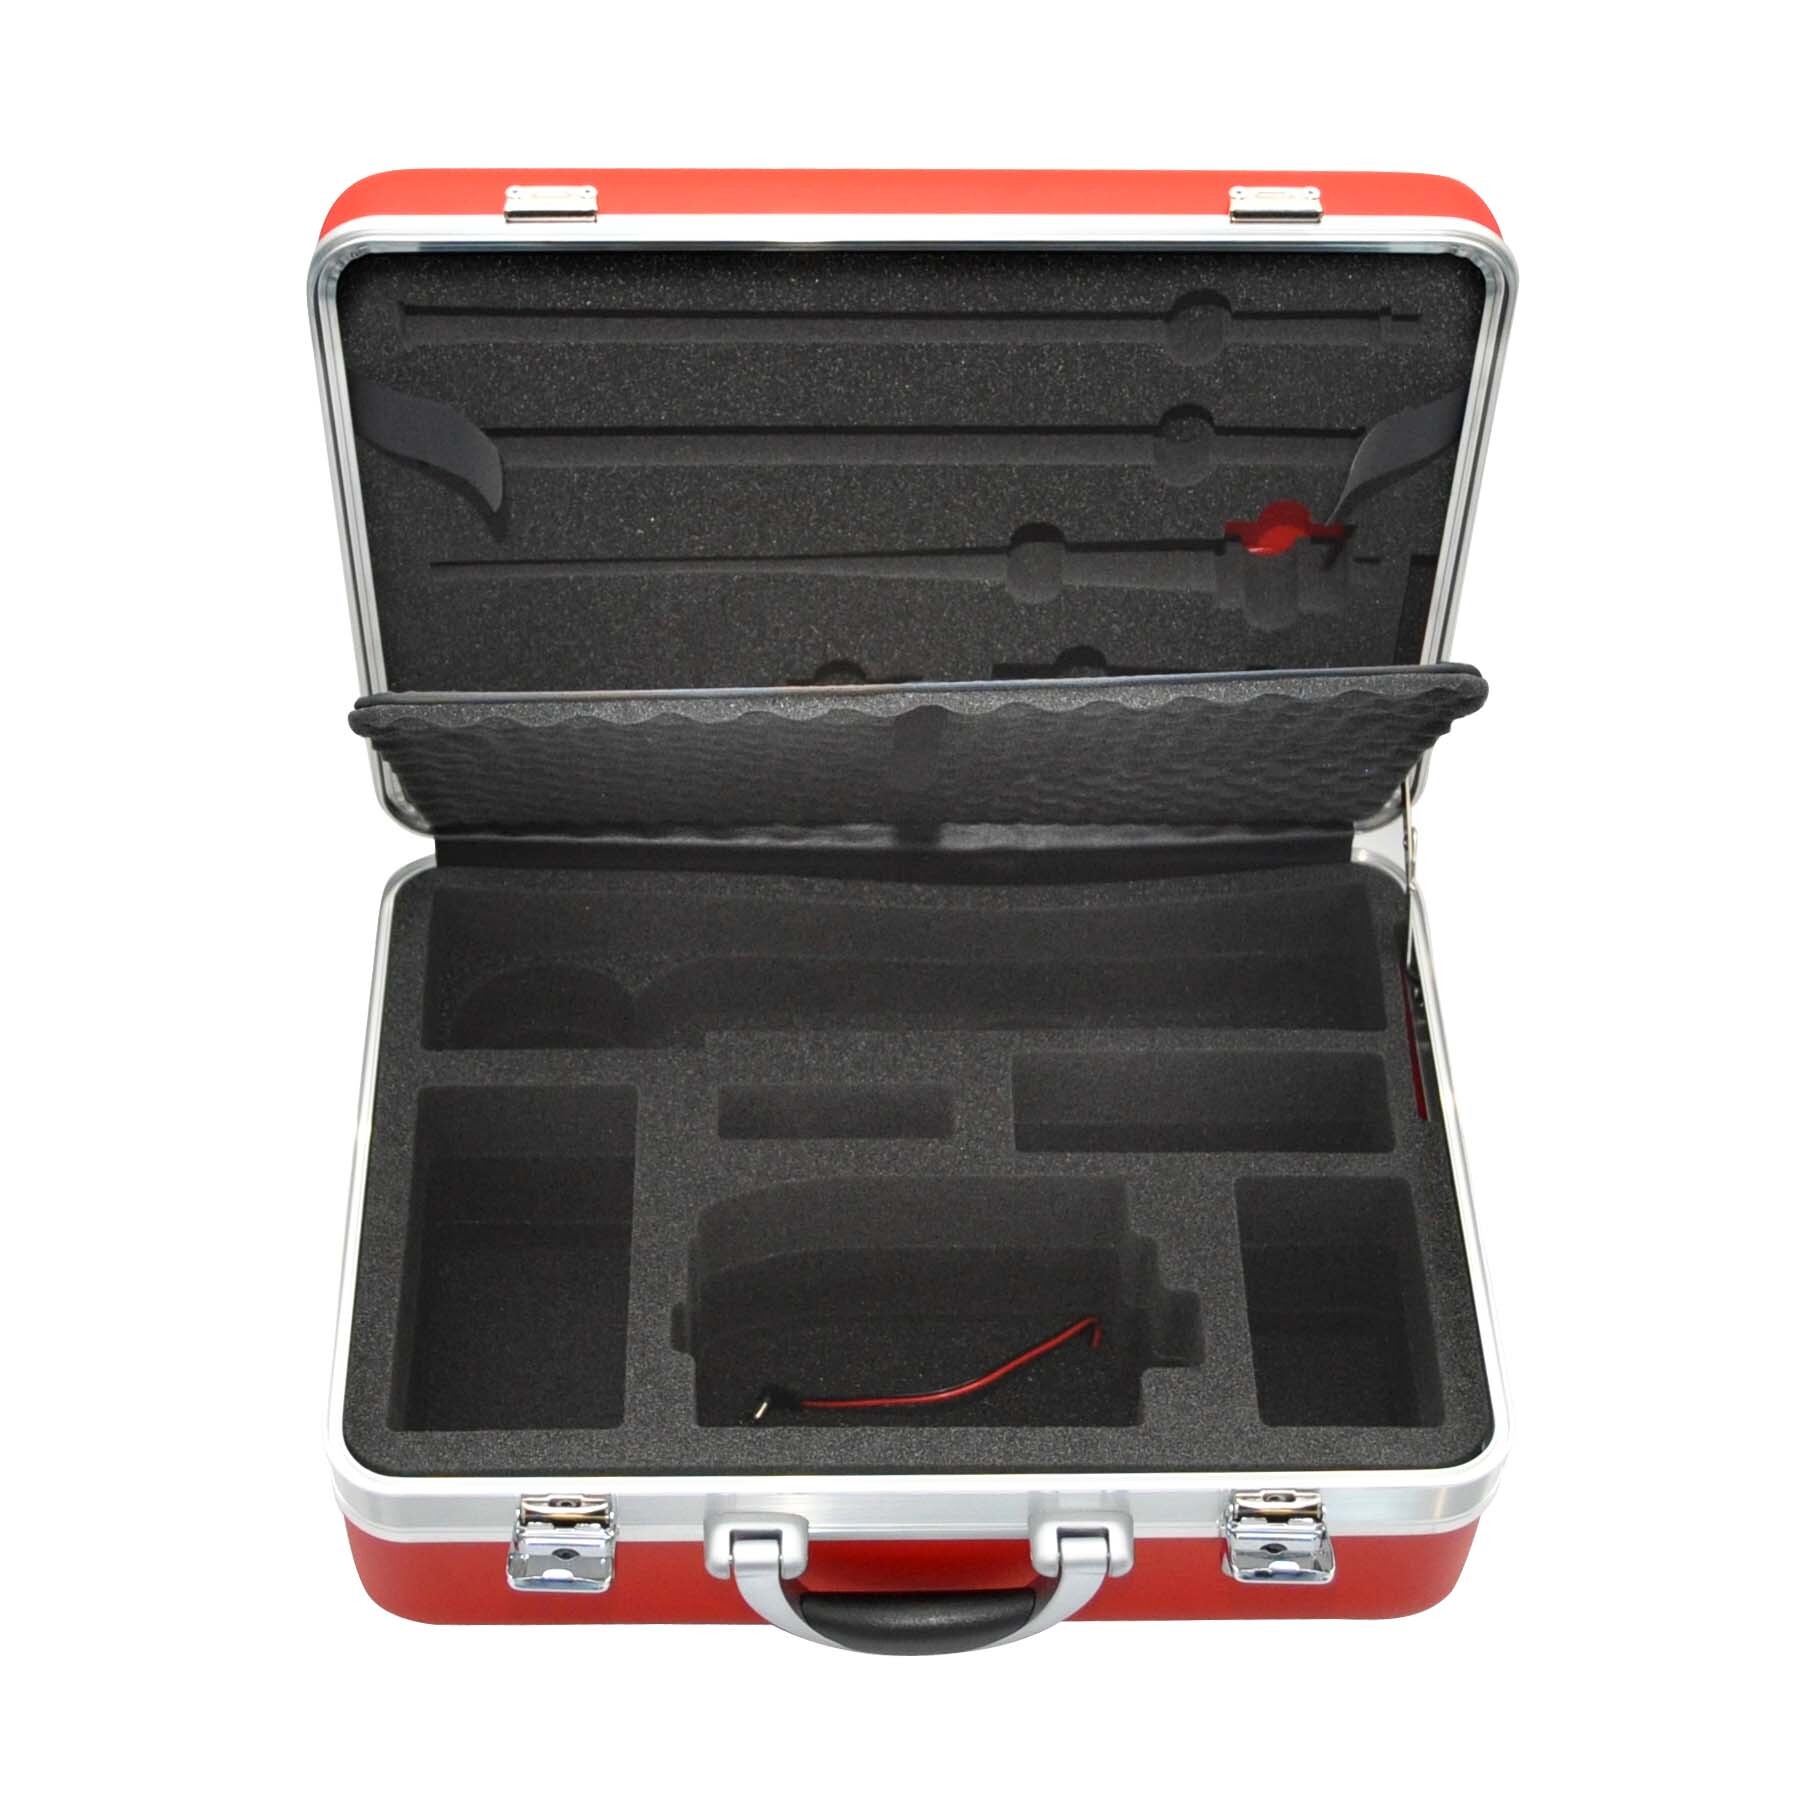 Aluminum carrying case for GOLIATH / HUNTER